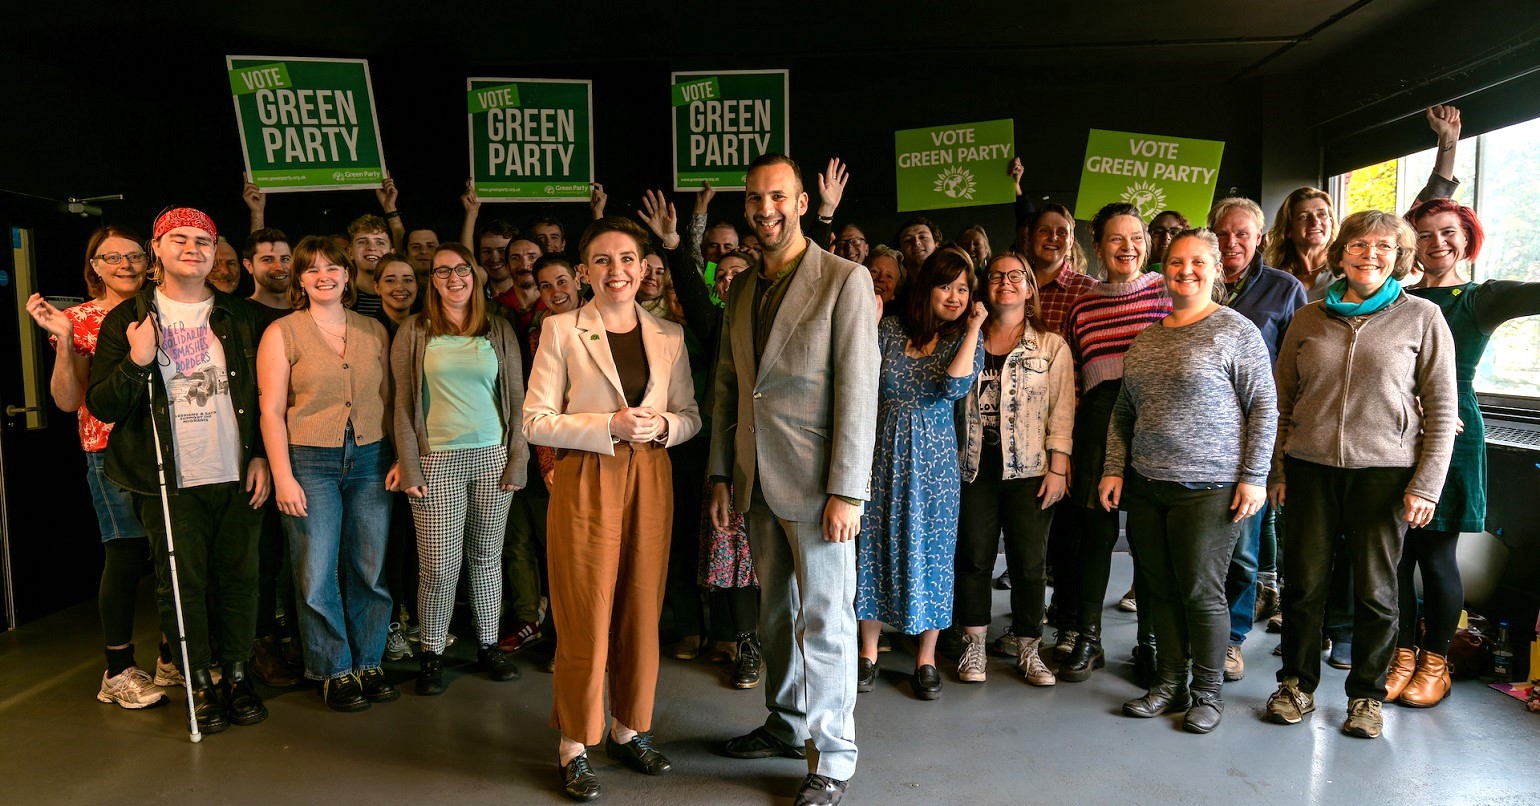 Carla Denyer and Zack Polanski standing in front of a crowd of Green Party supporters